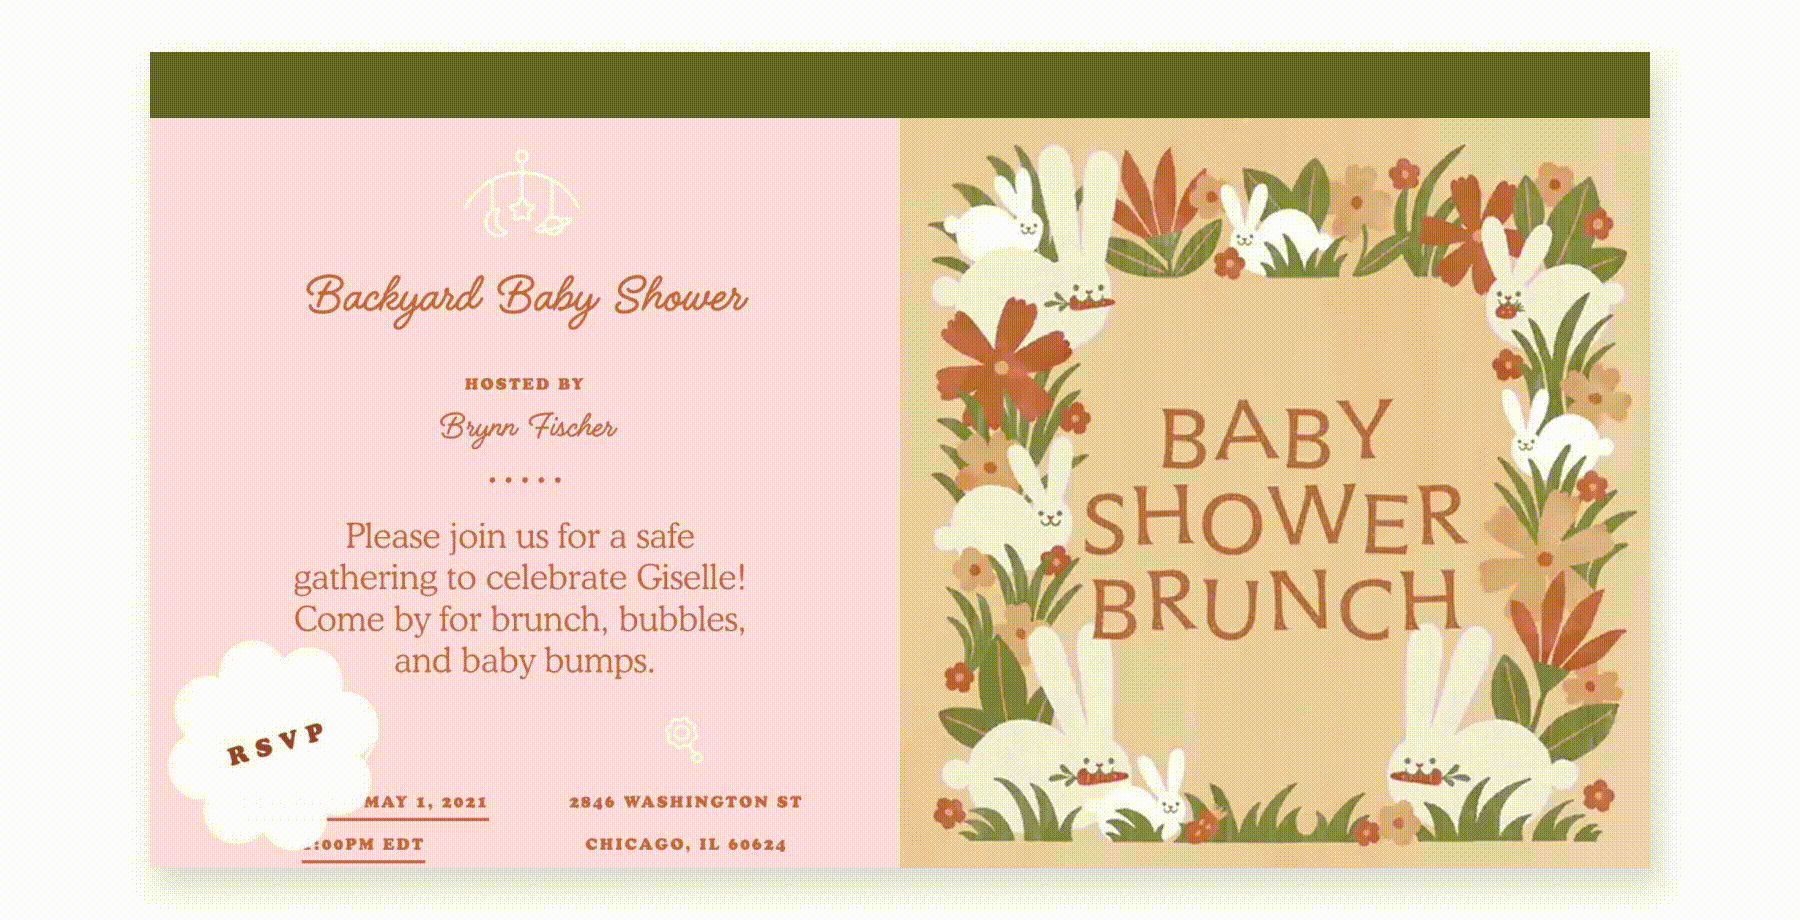 An online invite for a baby shower brunch with rabbits in a garden munching on carrots